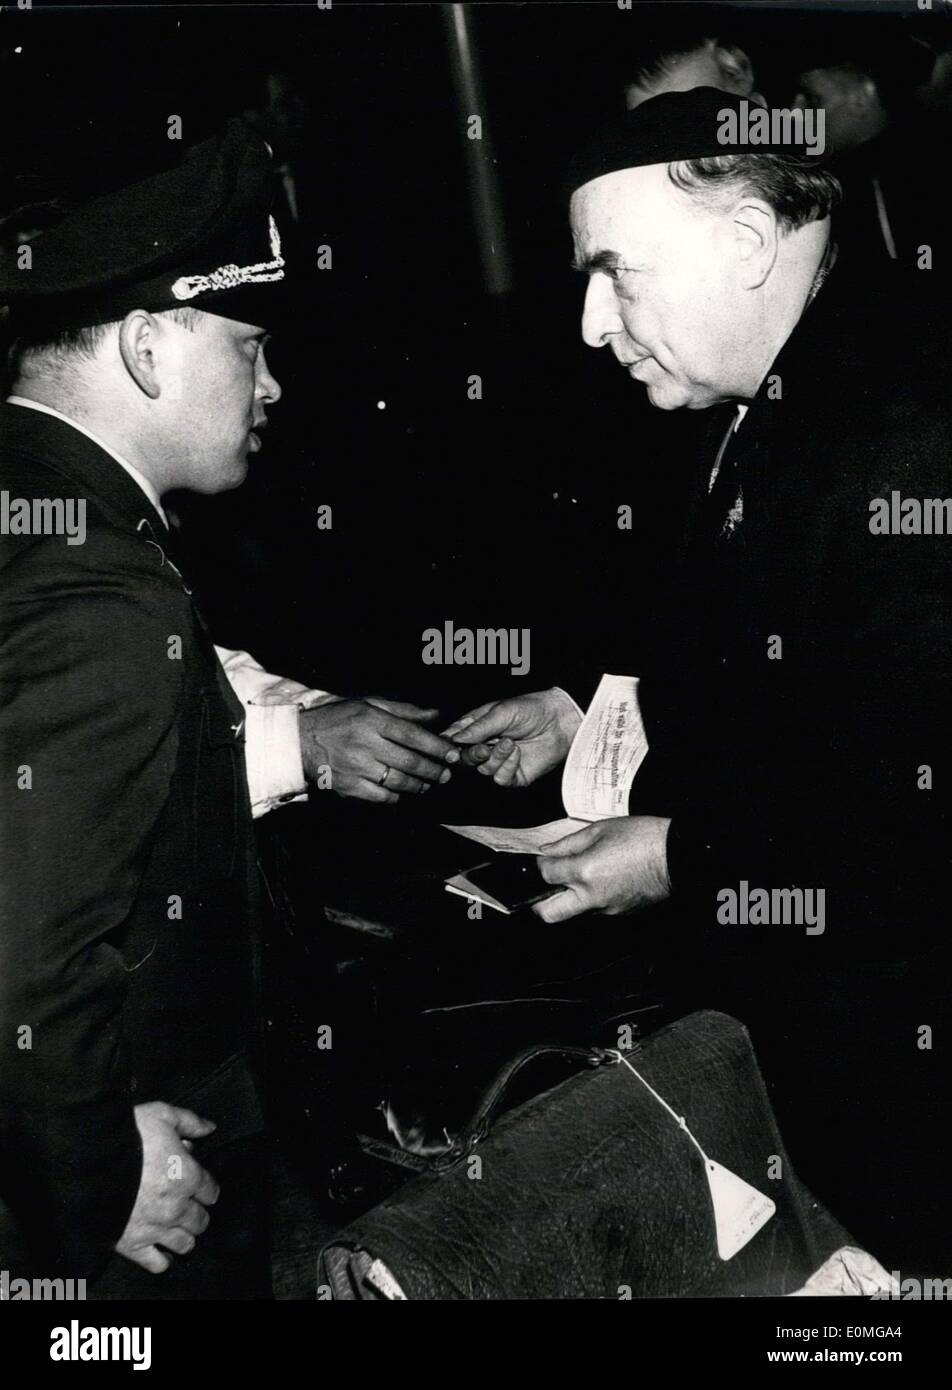 Mar. 19, 1955 - Otto Strasser again in Germany. The former leader of the ''Black Front,'' Otto Strasser, arrived in Hamburg from Berlin on March 18, 1955. The politician, living in exile since 1933, will again be in Germany after he fled from Hitler. Our picture shows Otto Strasser at customs clearance in Frankfurt airport. Stock Photo